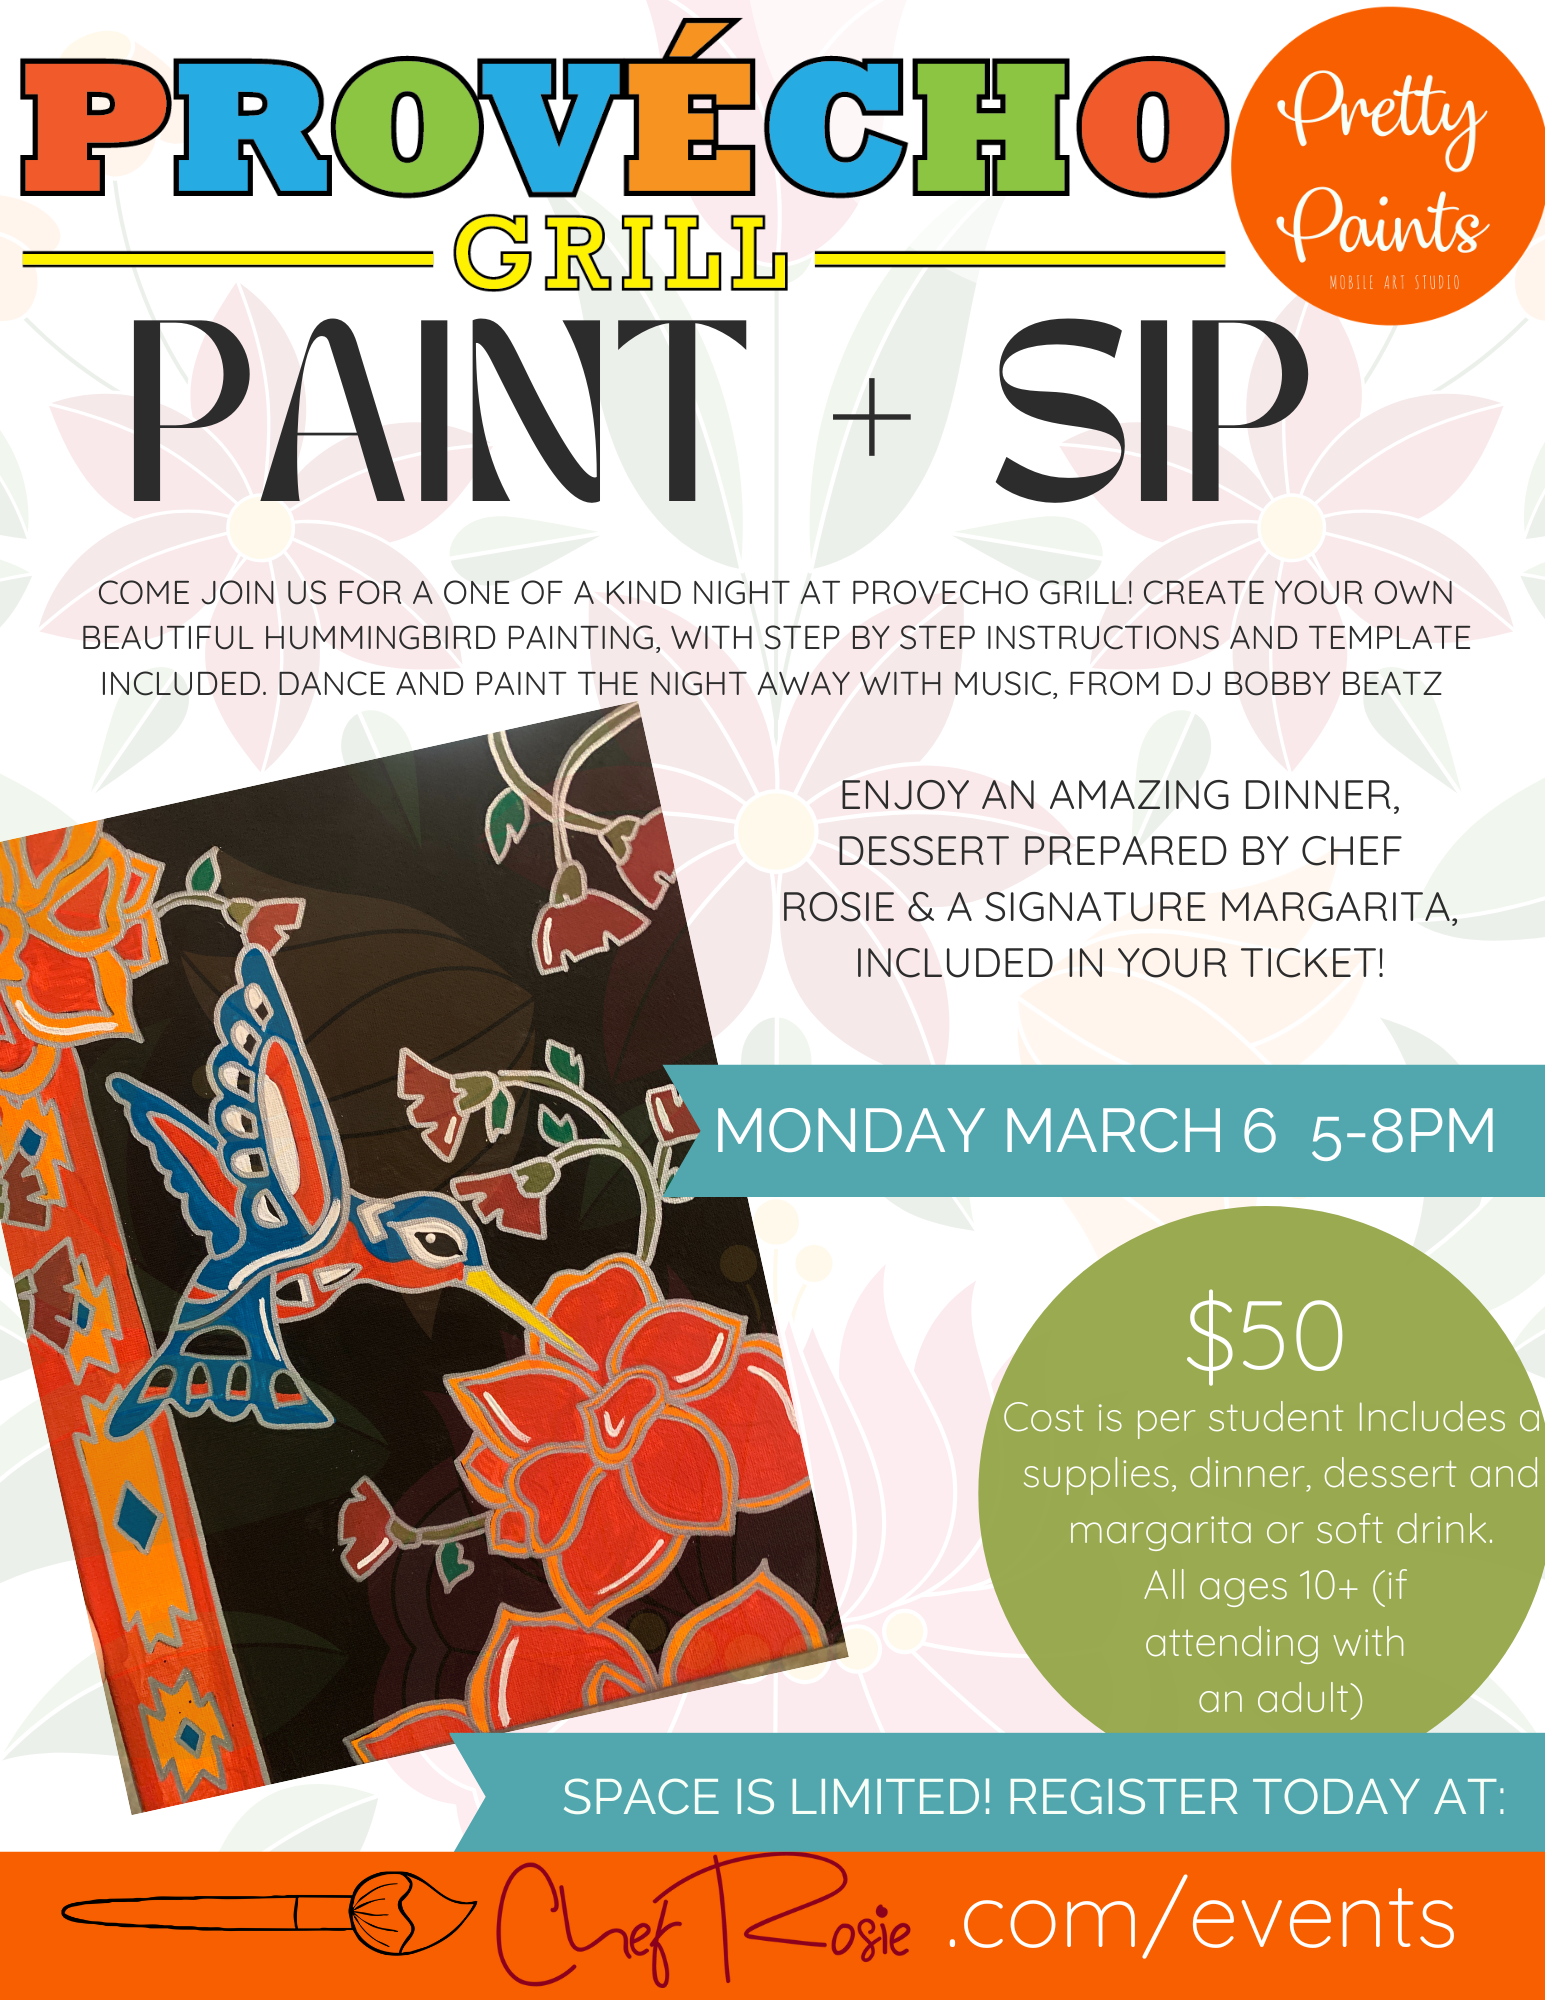 Paint & Sip event at Provecho Grill hosted by Pretty Paints